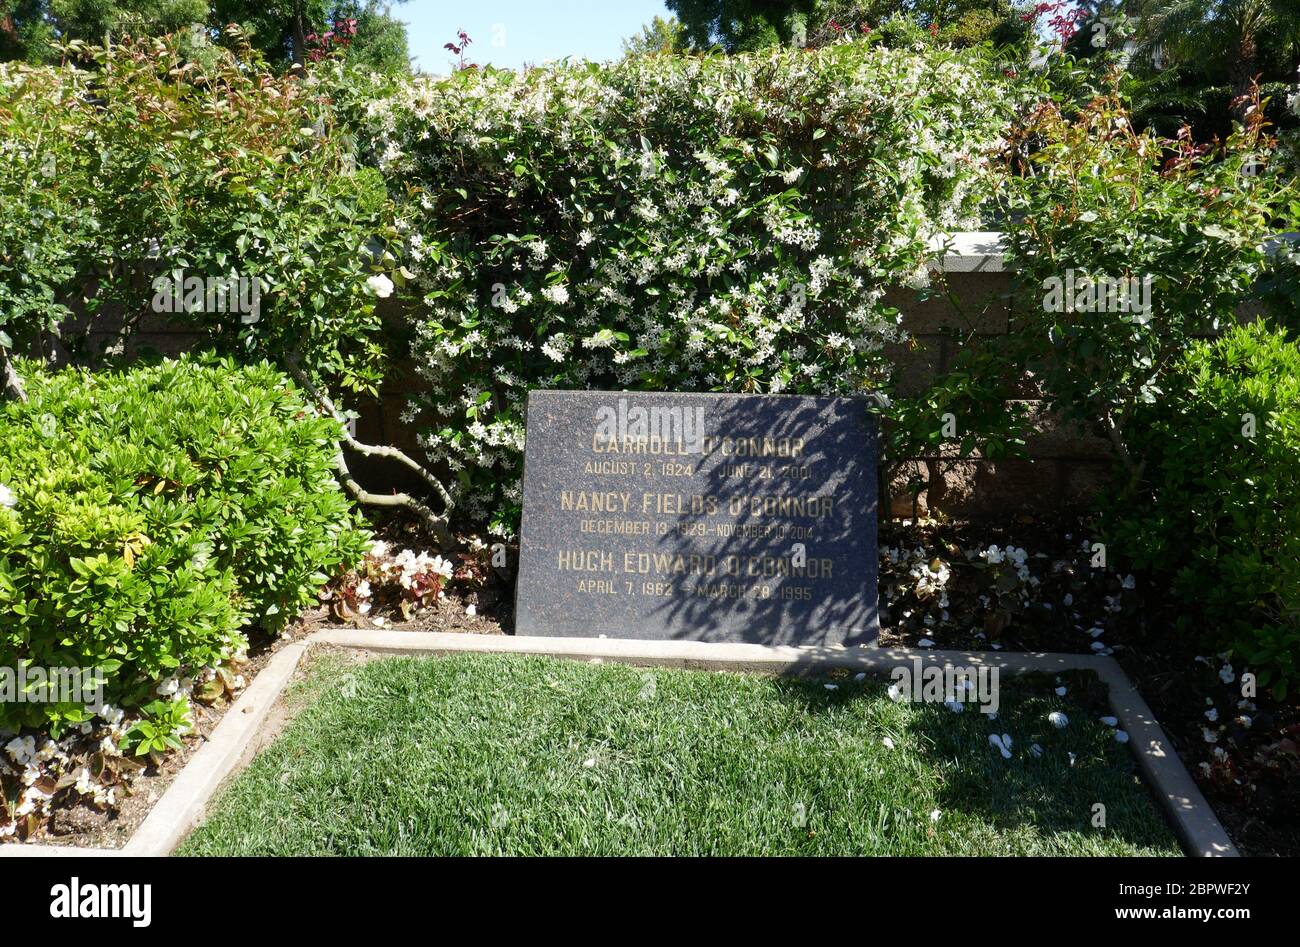 Los Angeles, California, USA 19th May 2020 A general view of atmosphere of Carroll O'Connor's grave at Pierce Brothers Westwood Village Memorial Park on May 19, 2020 in Los Angeles, California, USA. Photo by Barry King/Alamy Stock Photo Stock Photo